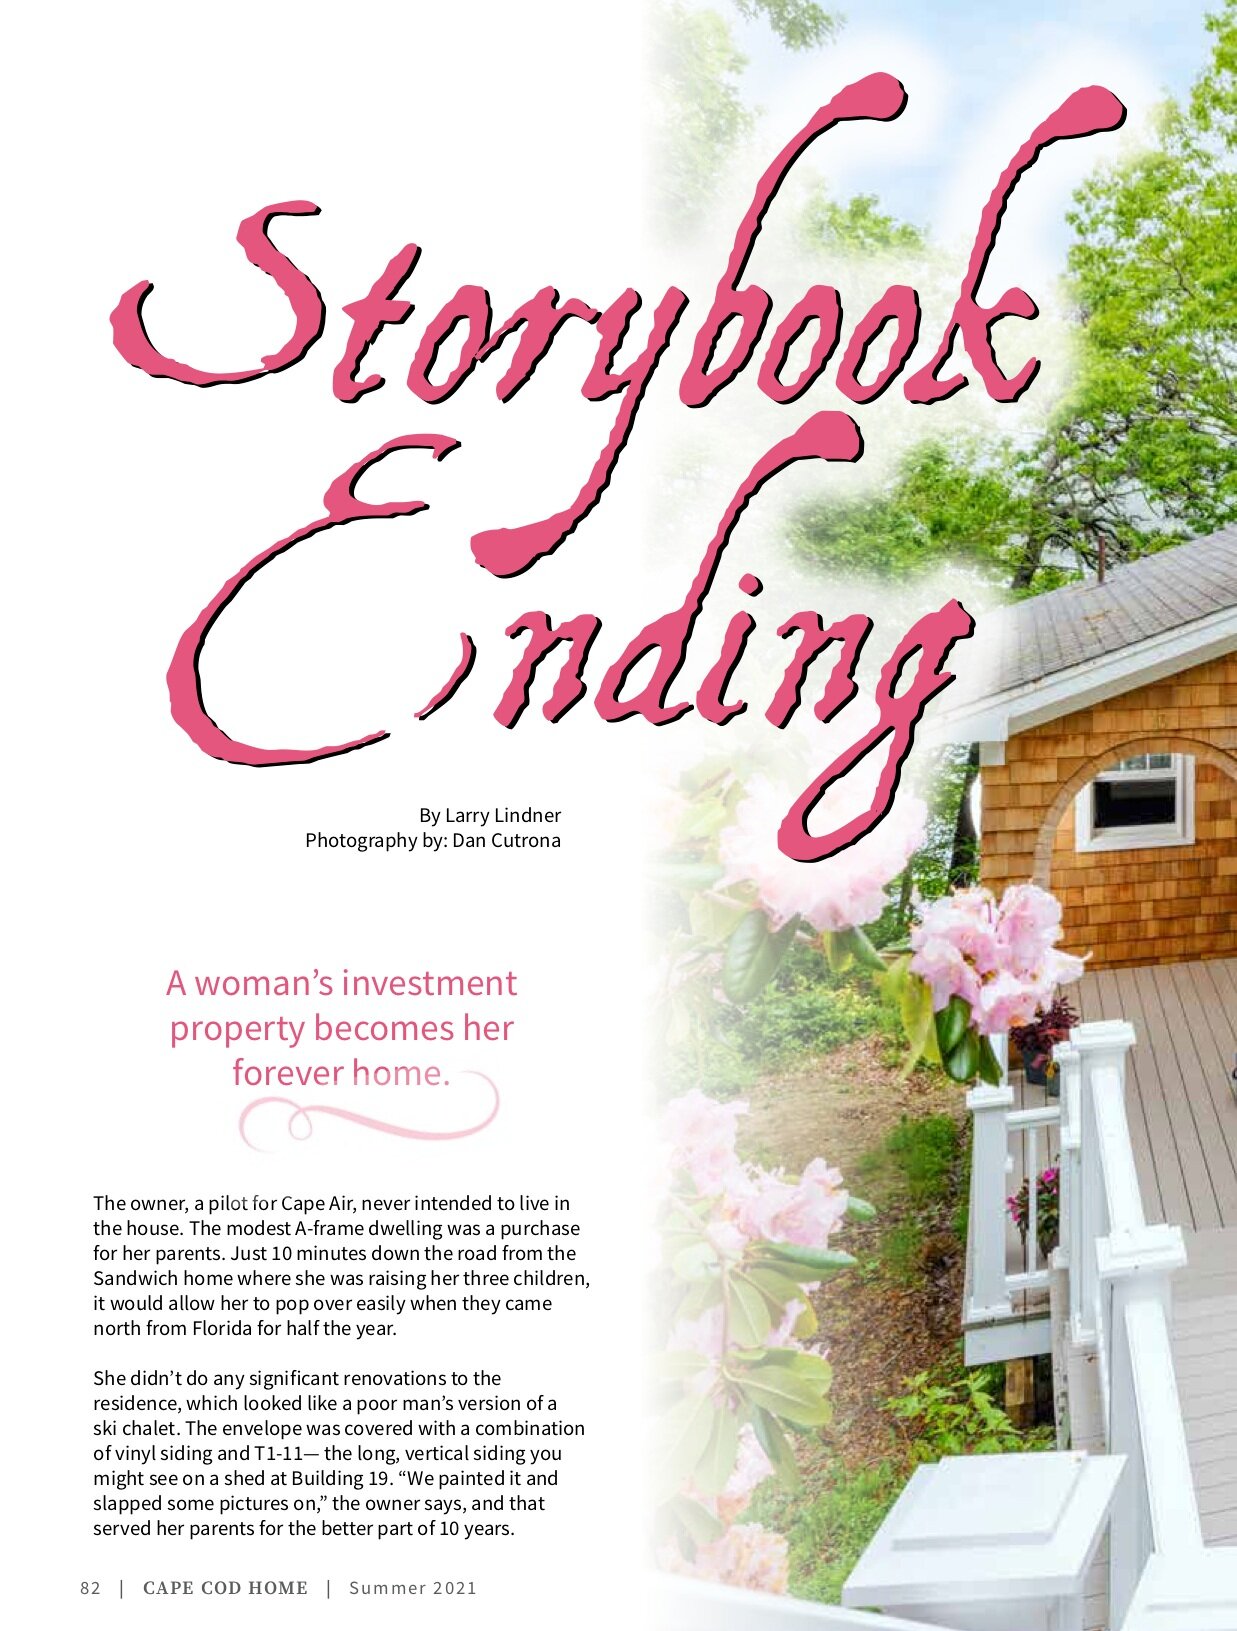 Cape Cod Home Storybook Ending Cover Featuring Cape Cod Home Designed by Donna Elle